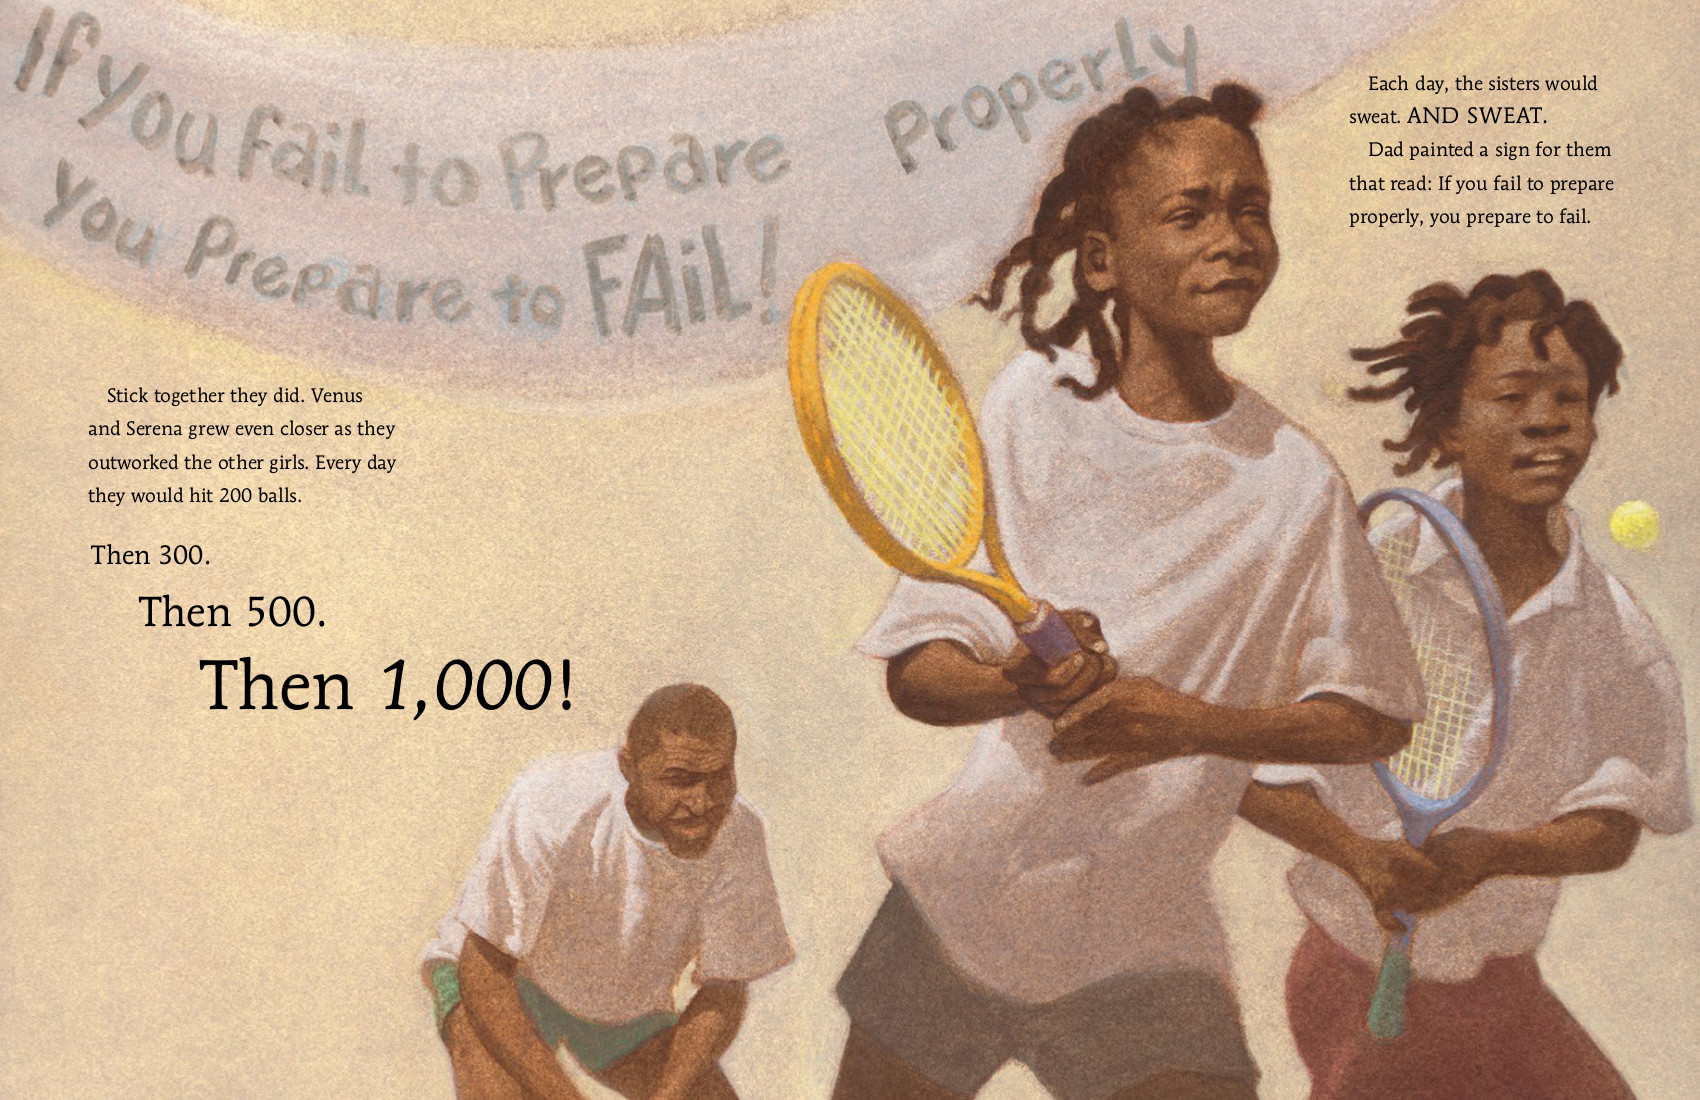 Sample Image from Sisters and Champions: The True Story of Venus and Serena Williams Illustrated by Floyd Cooper